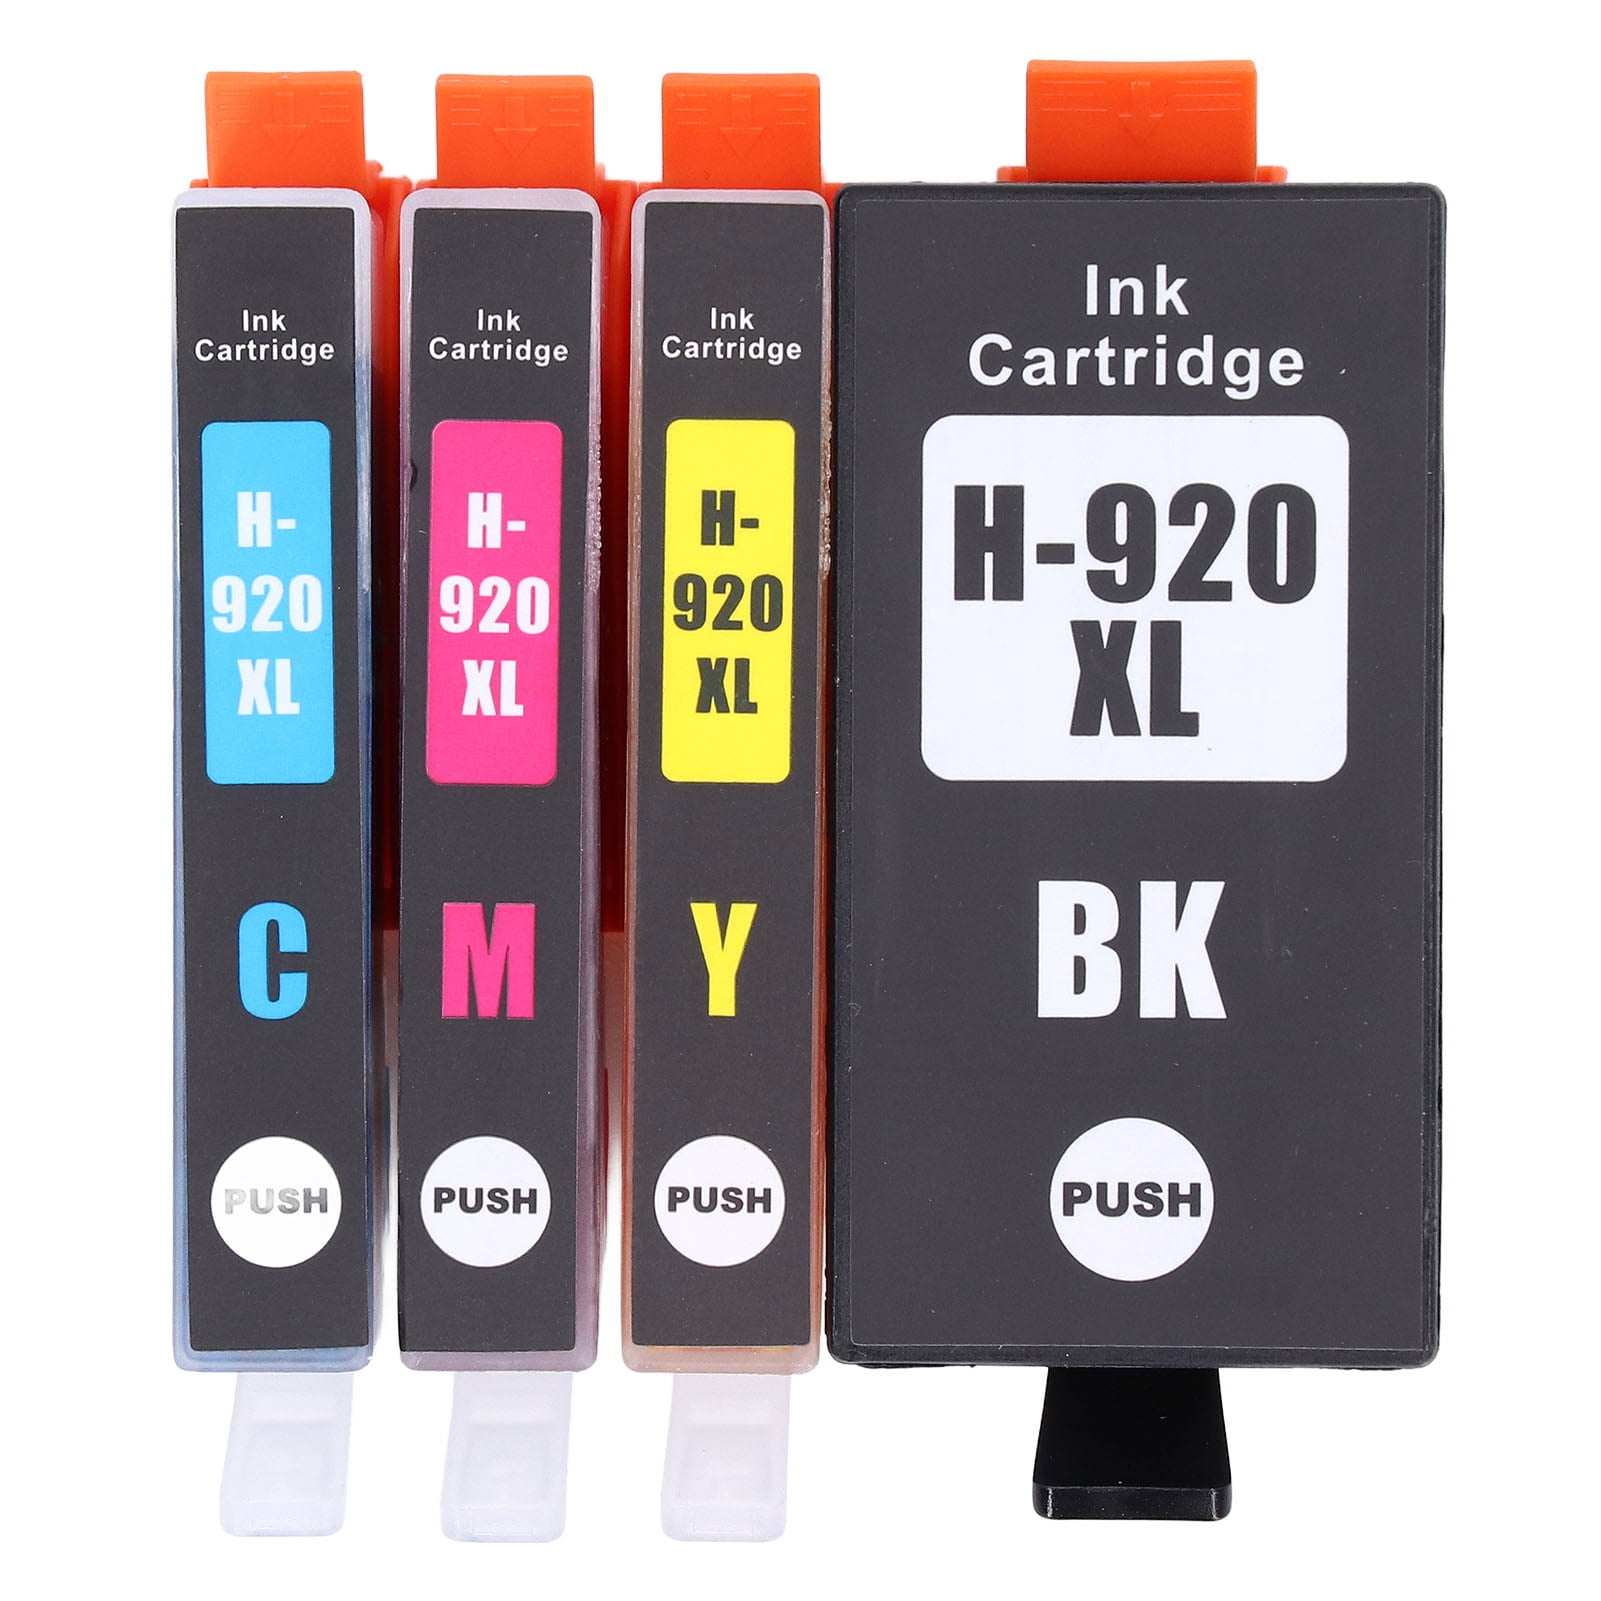 Ink Cartridge, Bright Color Printer Ink For Officejet 6000 6500 6500 Wireless 6500A 7000 7500 For Office Walmart.com